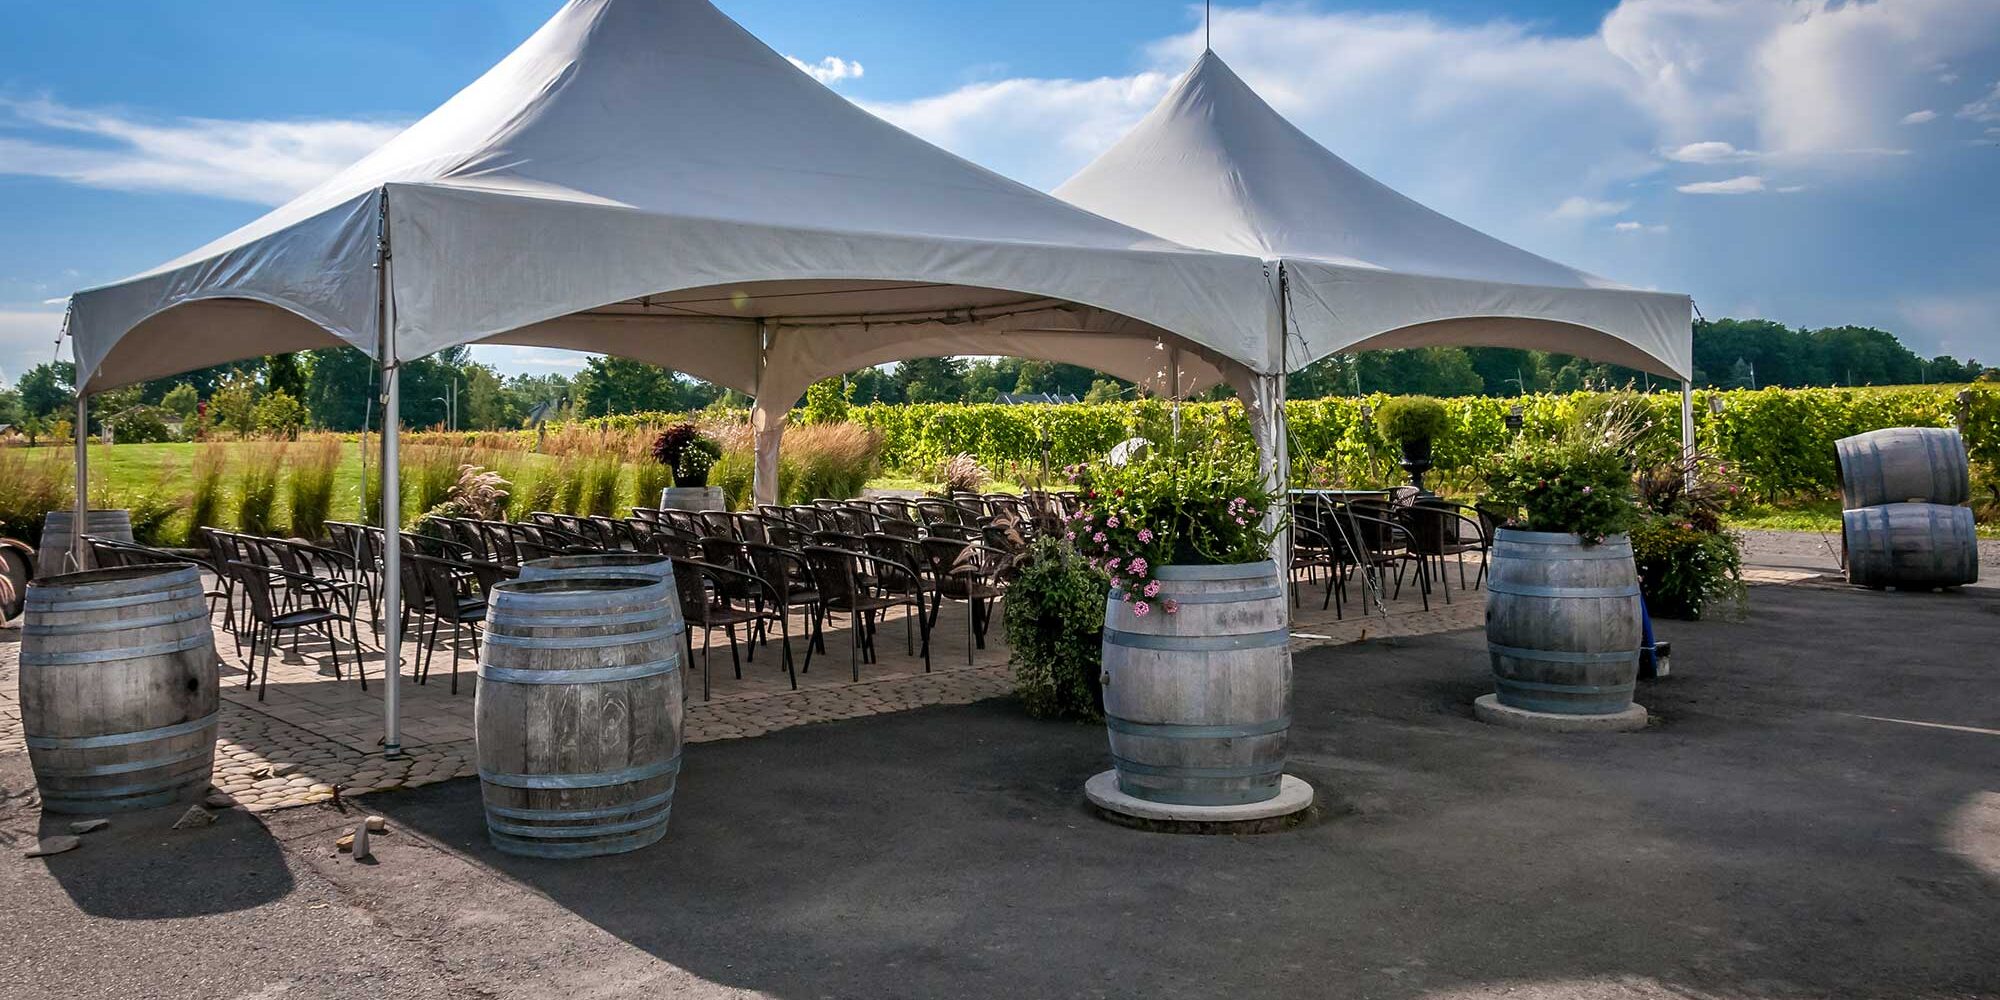 Tent rental for outdoor event party with wine barrels